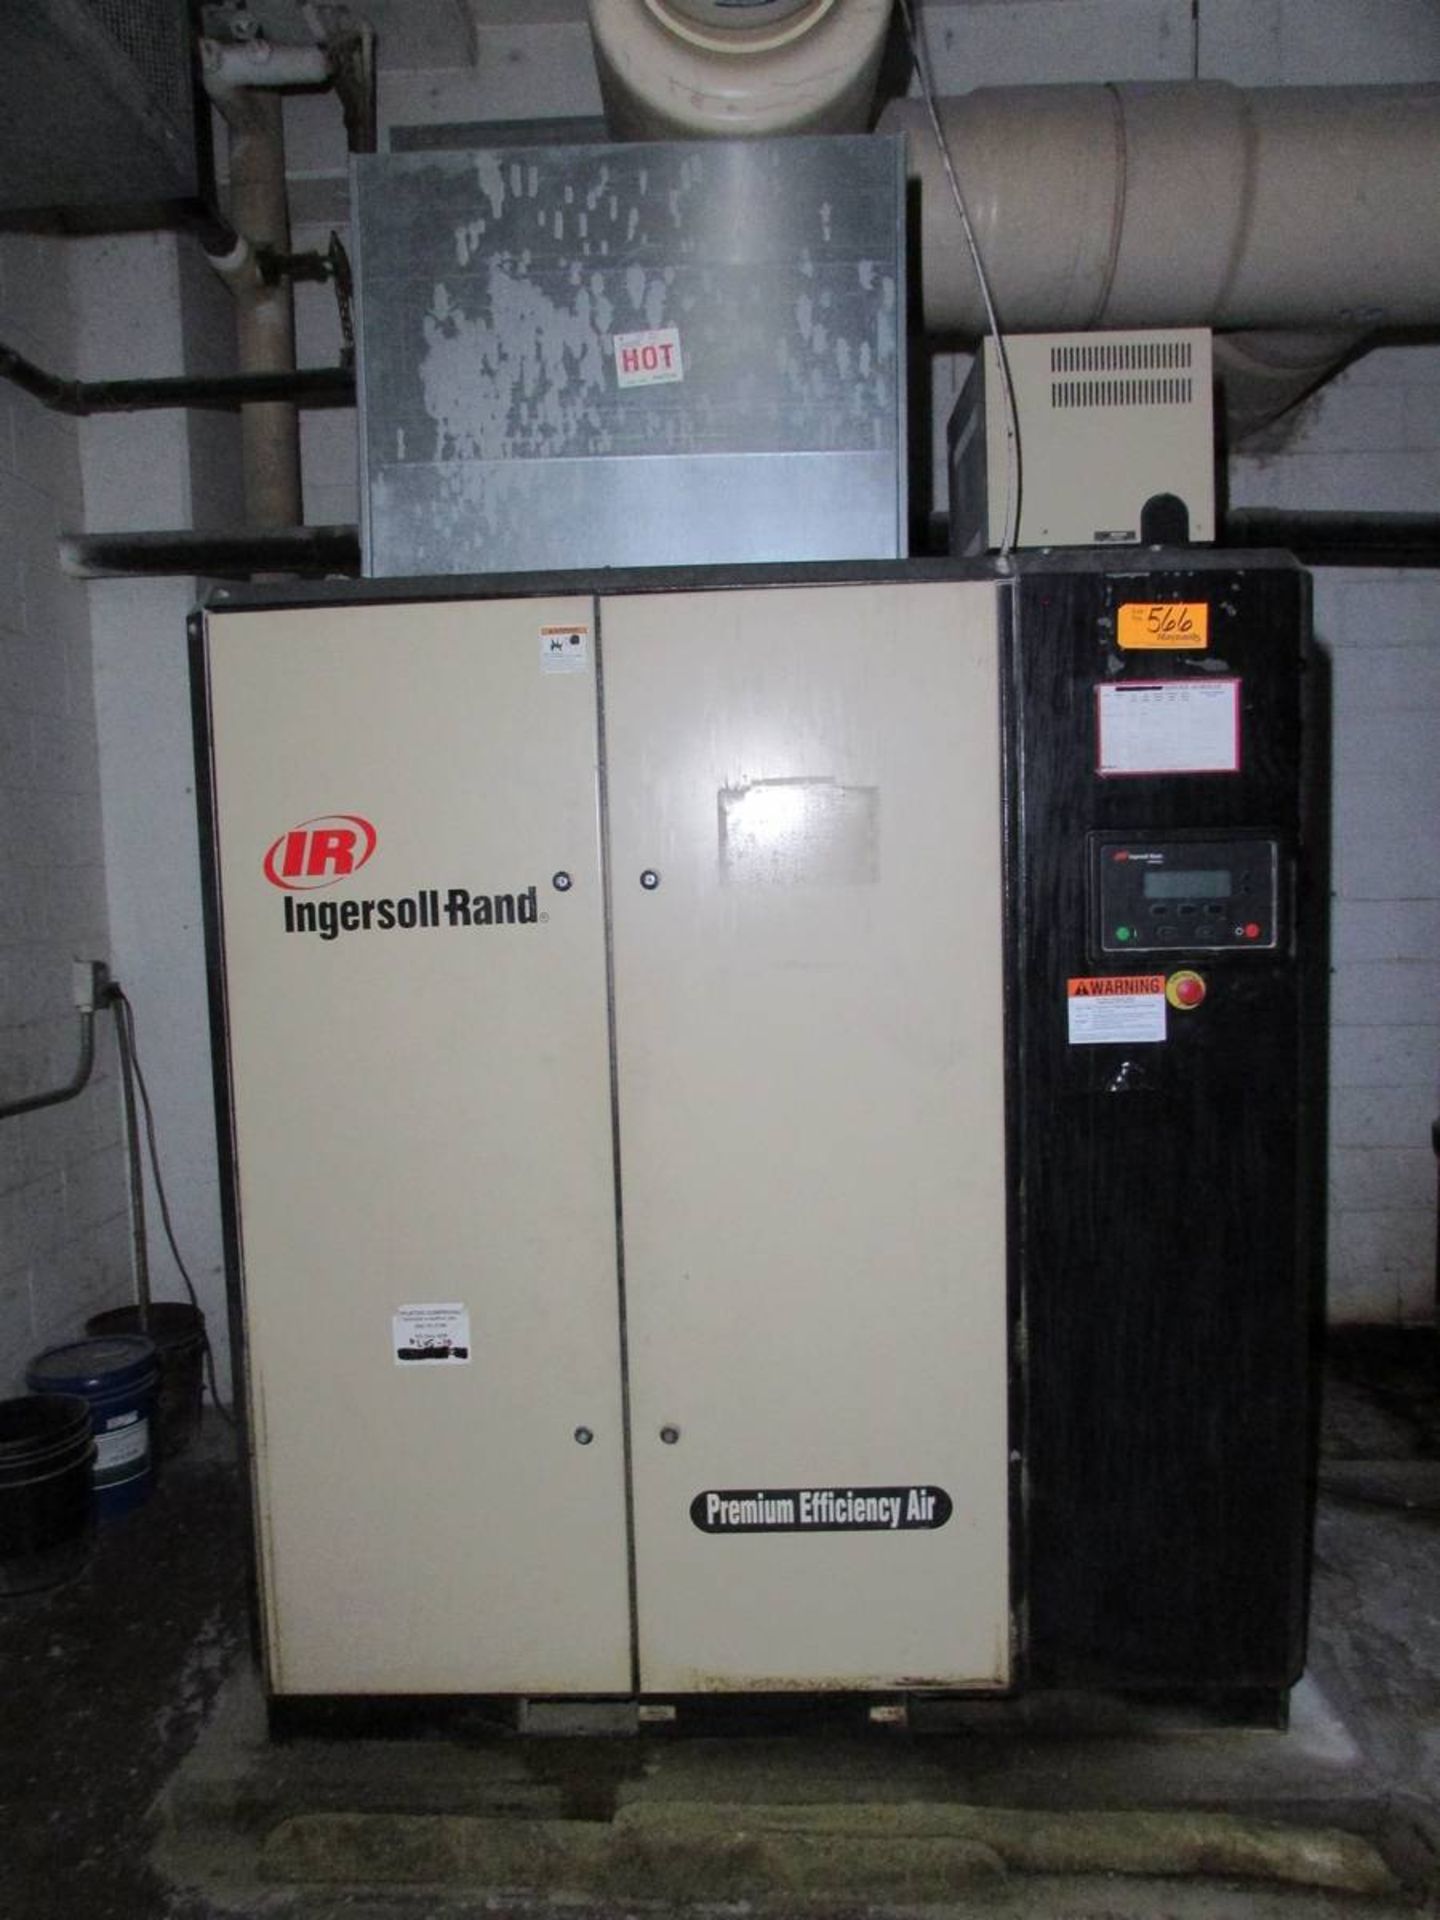 Ingersoll-Rand IRN75H-CC 75HP Rotary Screw Air Compressor - Image 2 of 5